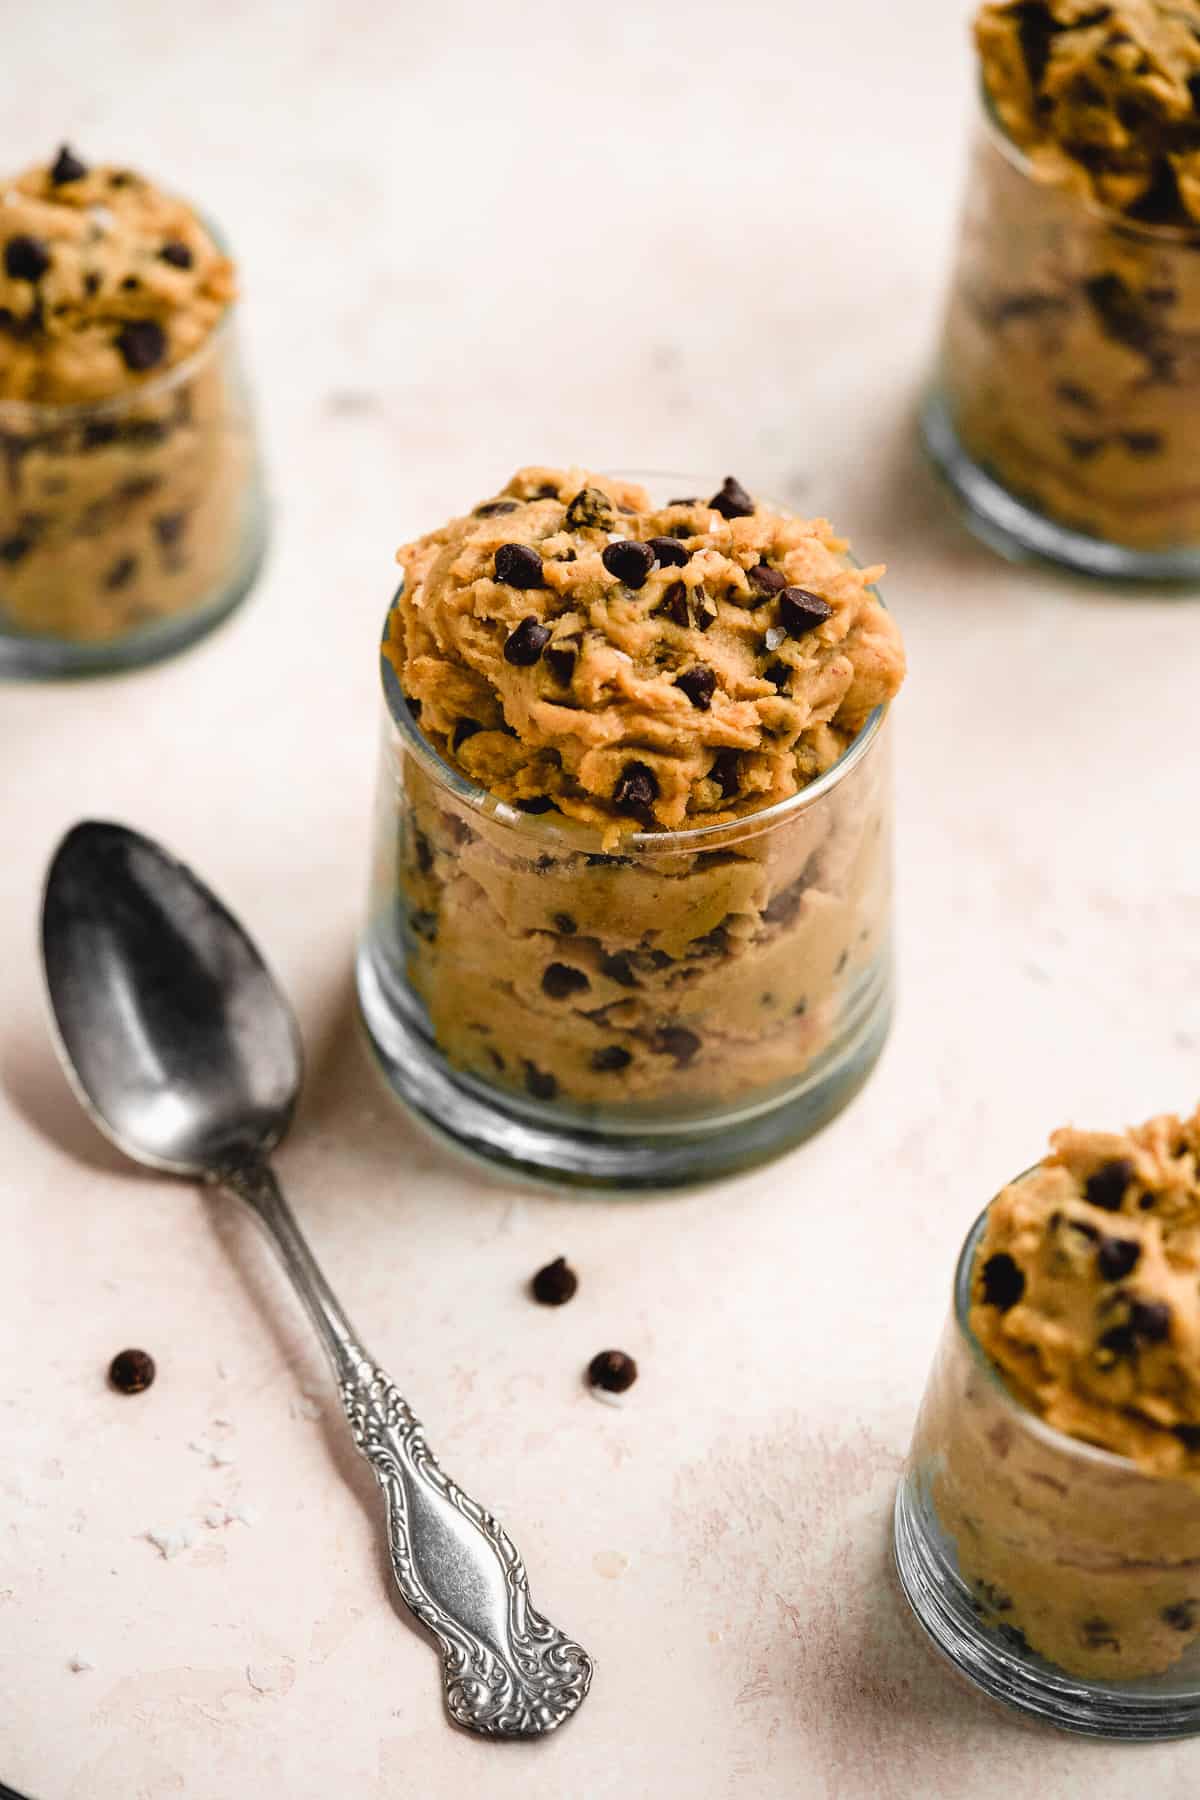 Small clear jar overflowing with yummy edible chocolate chip cookie dough.  A silver spoon is resting next to the jar and mini chocolate chips are sprinkled around.  